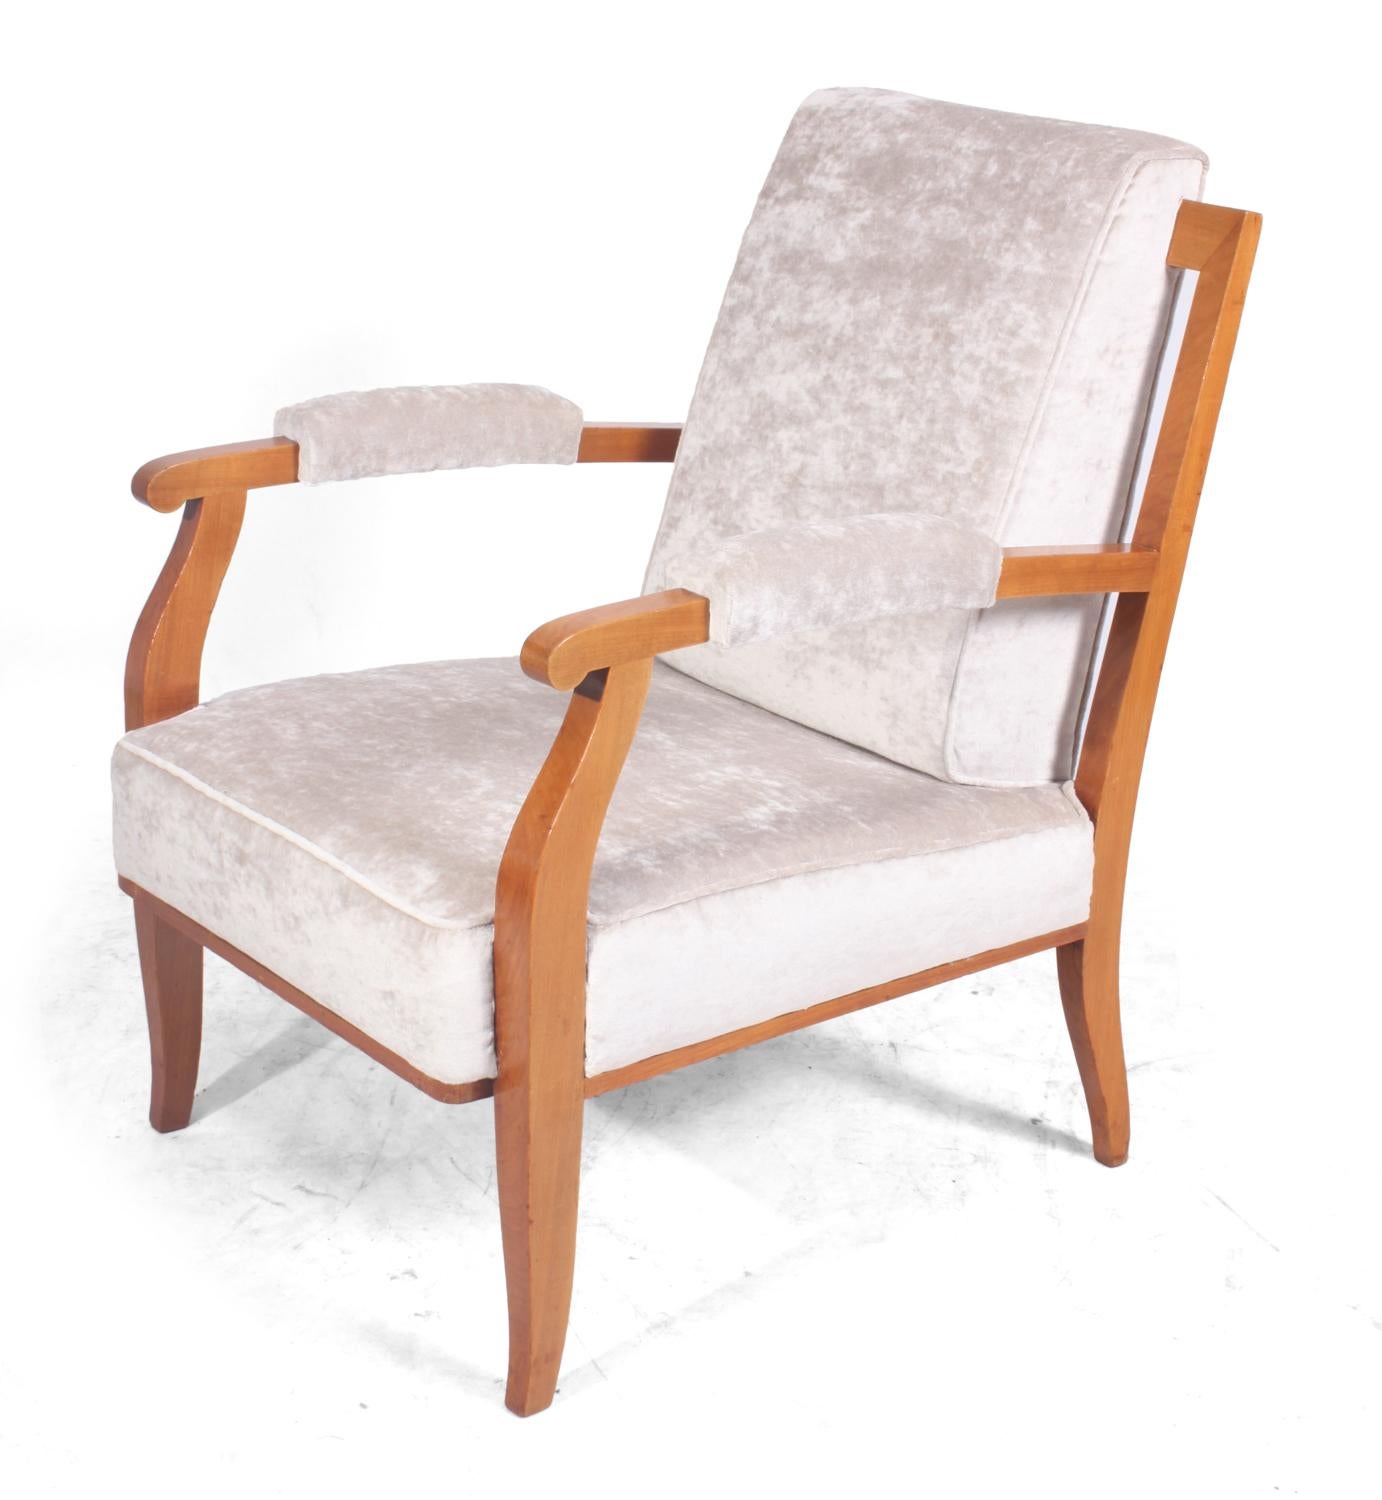 Vintage cherrywood chair by Jules Leleu, circa 1950.
This chair was designed and produced in France by Jules Leleu stamped to the back leg 28049, is solid cherry wood that has been fully polished and then has had full upholstery rebuild and covered